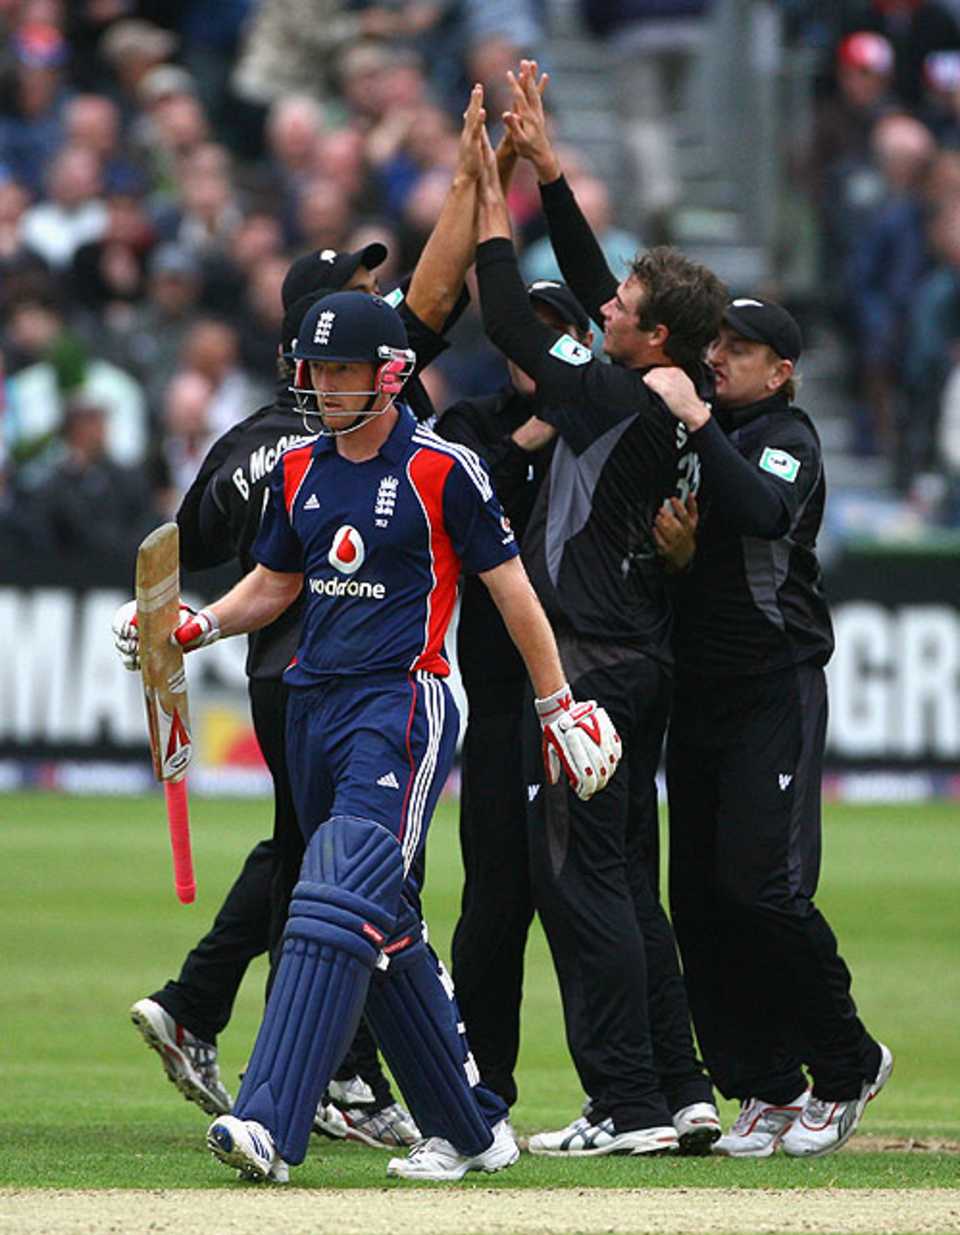 Paul Collingwood departs as New Zealand close in on victory